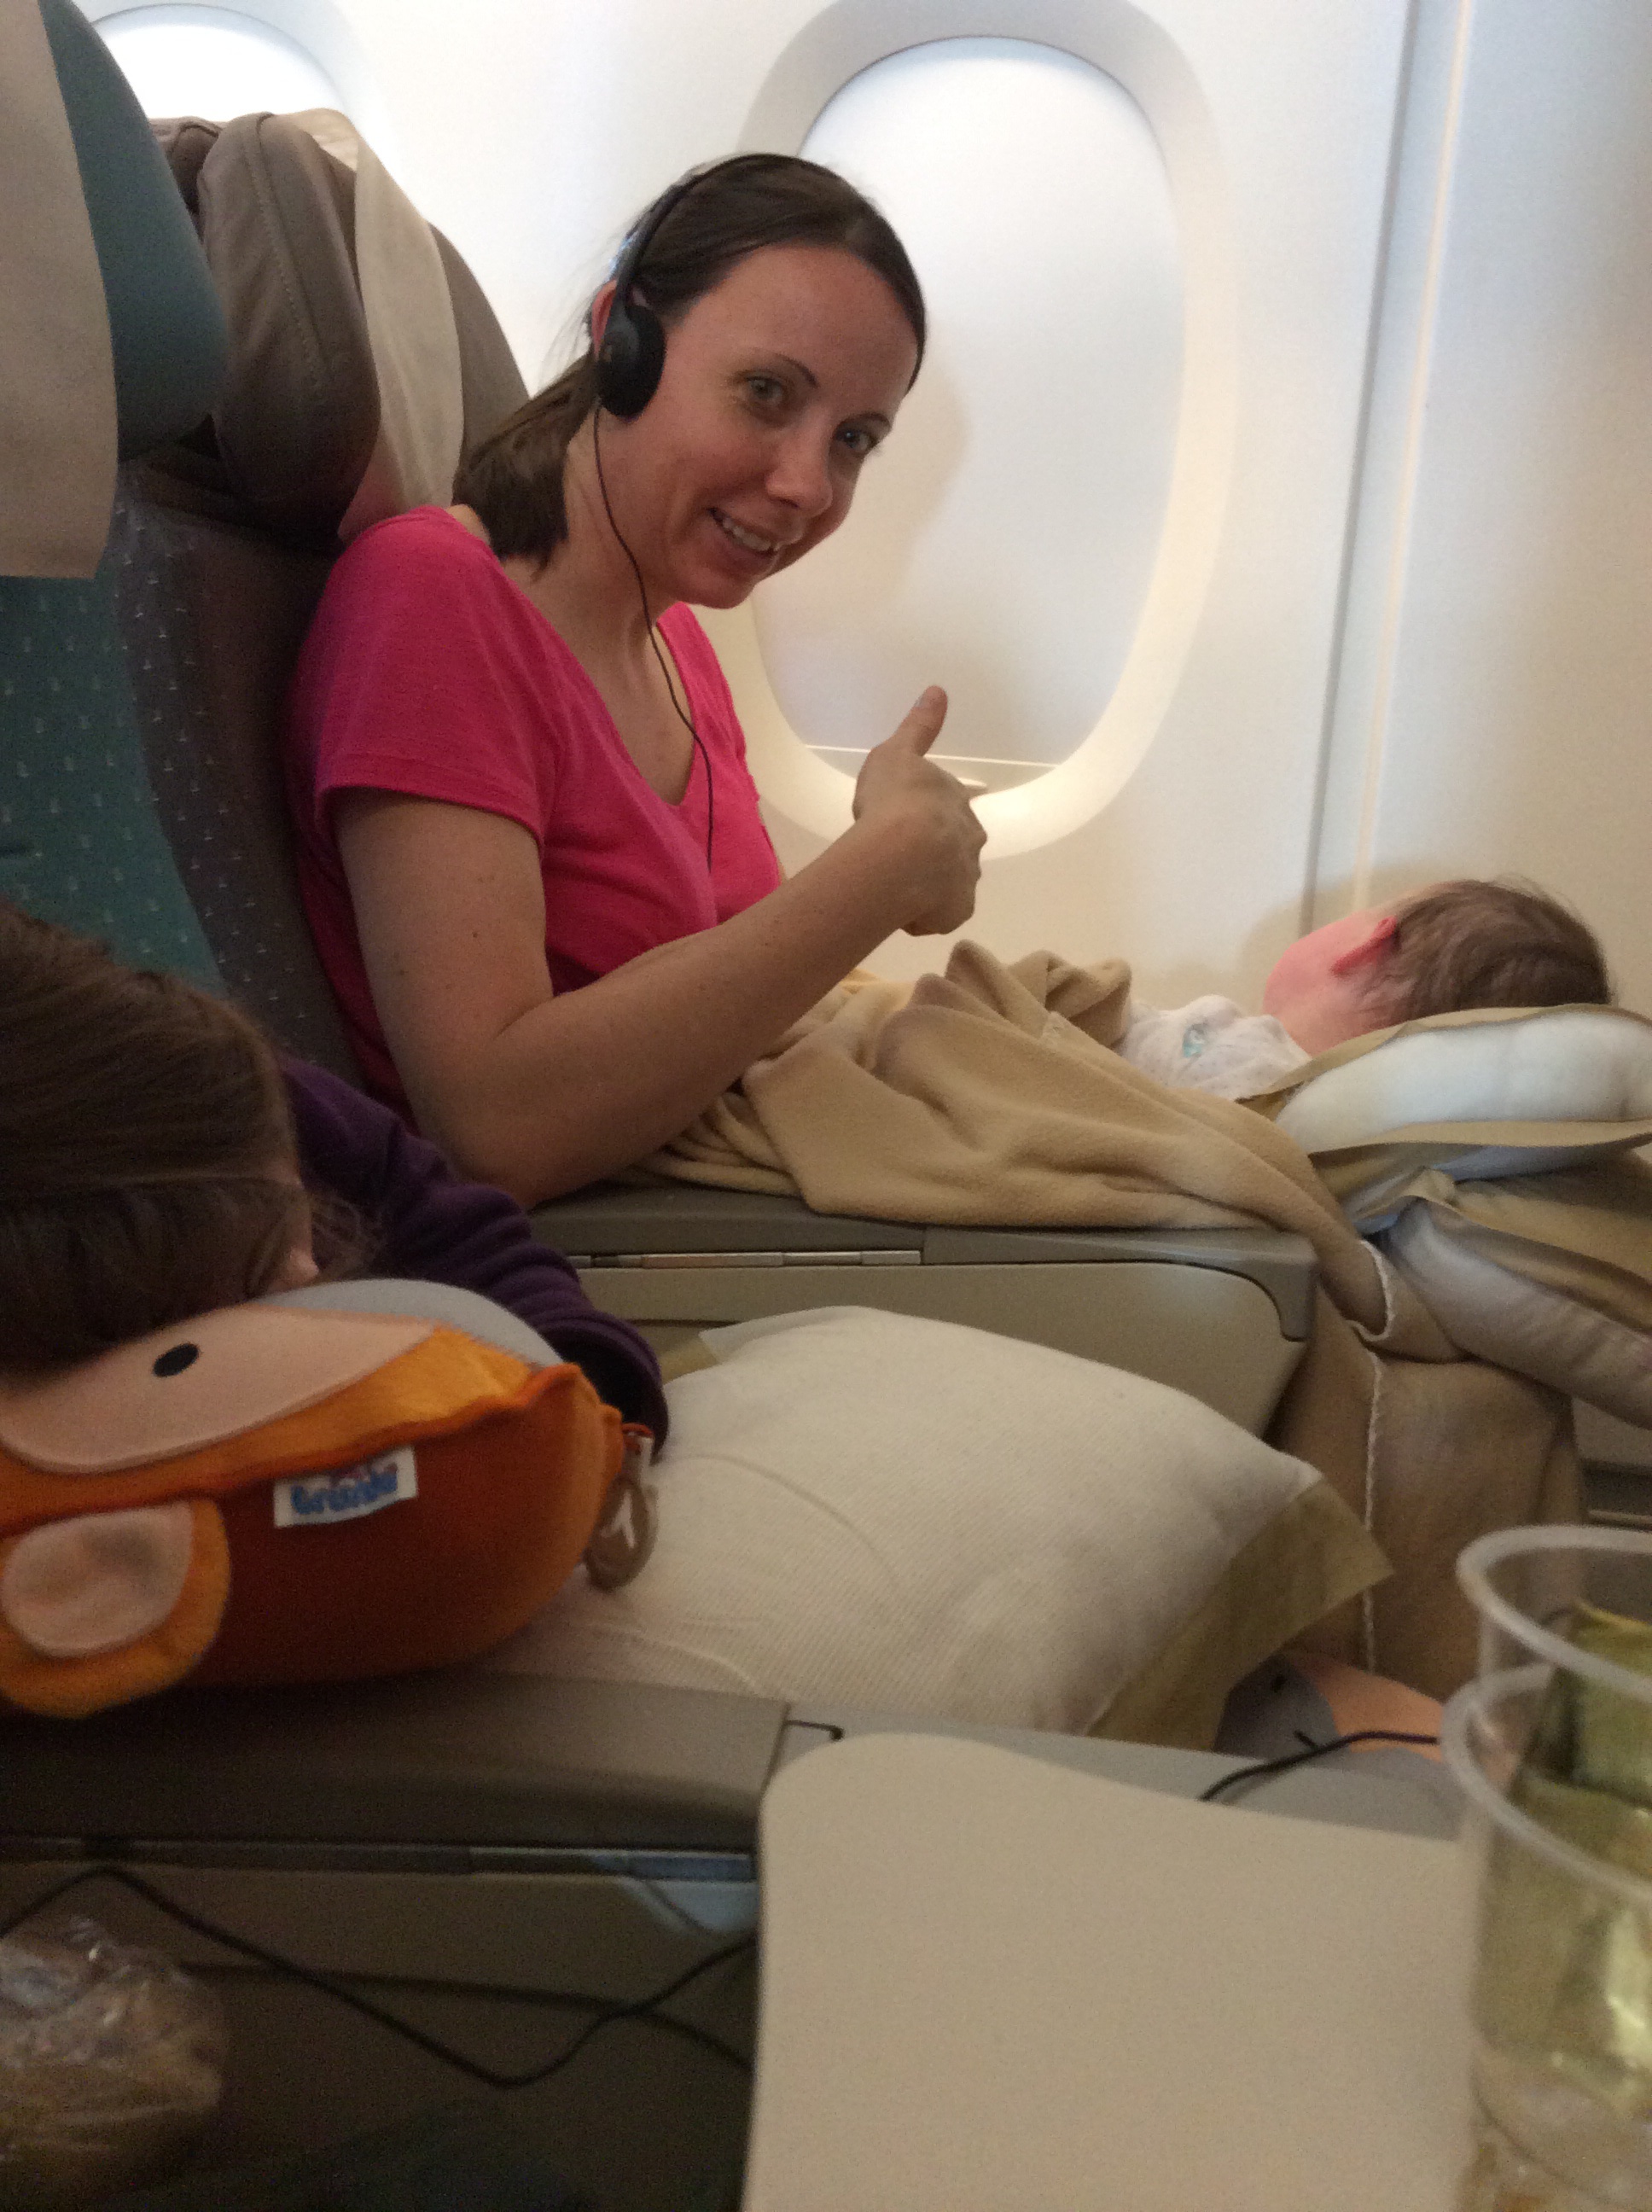 bassinet seat in singapore airlines